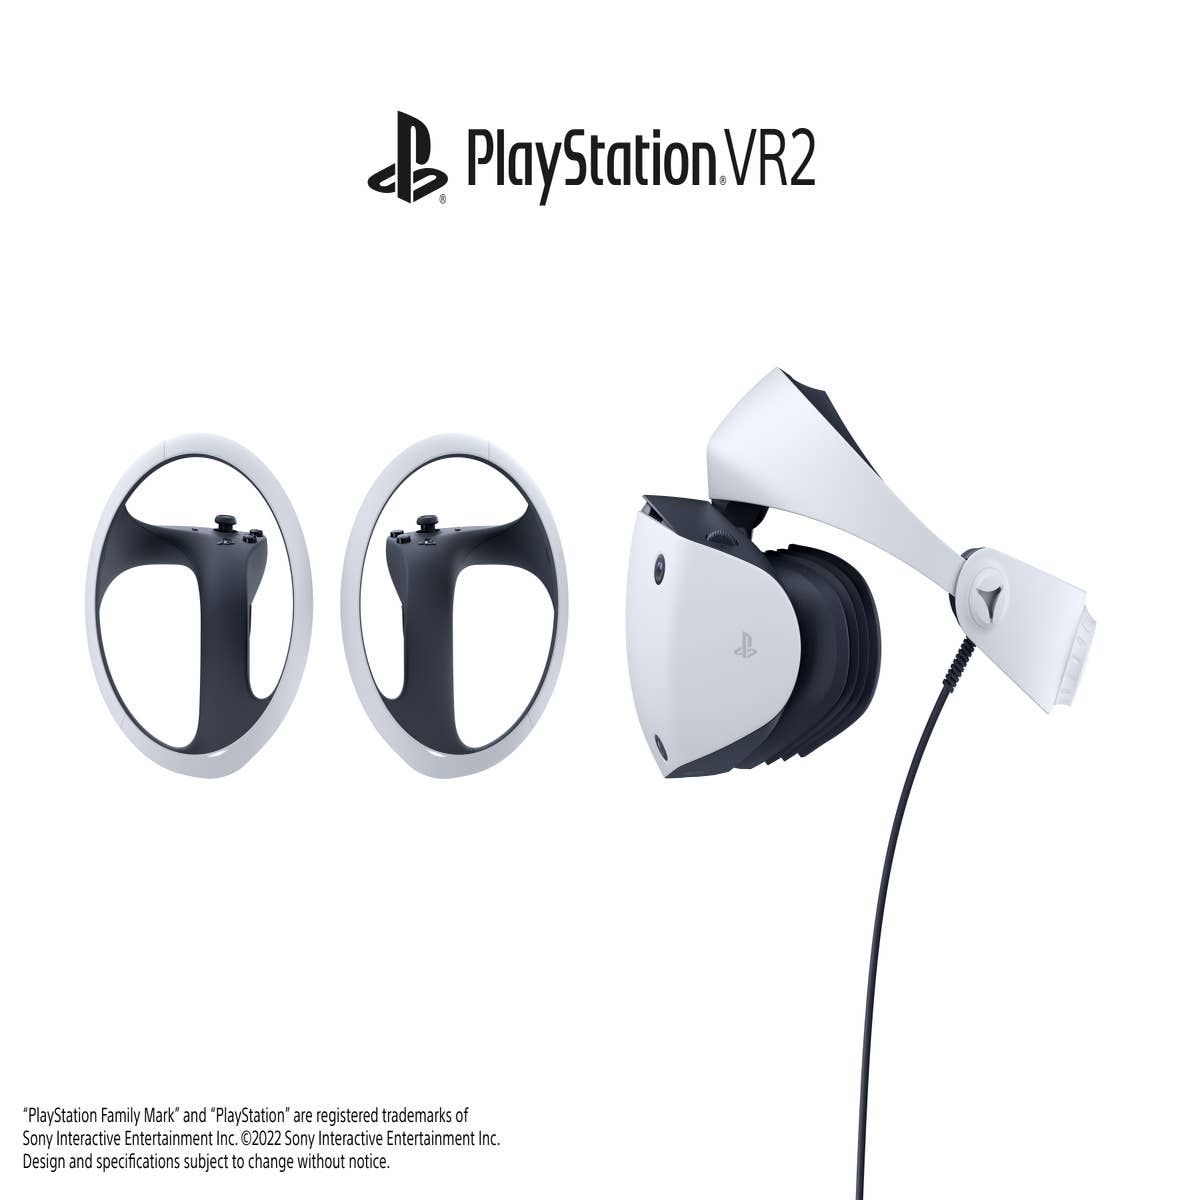 PSVR2 just got a sweet price cut in time for Christmas